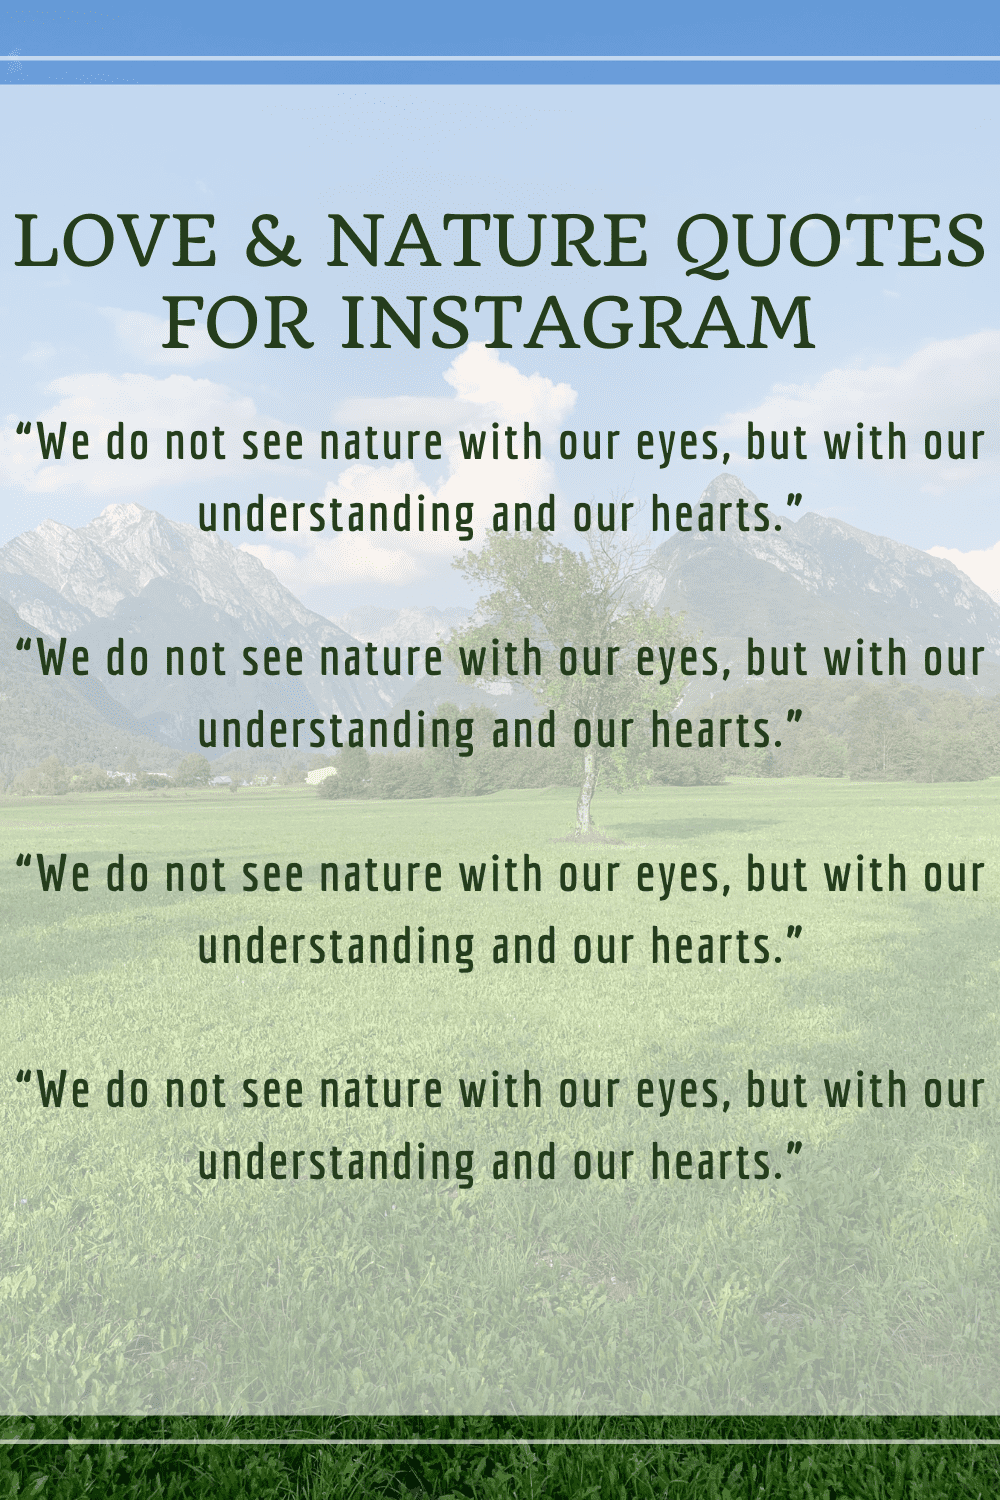 Love & Nature Quotes for Instagram